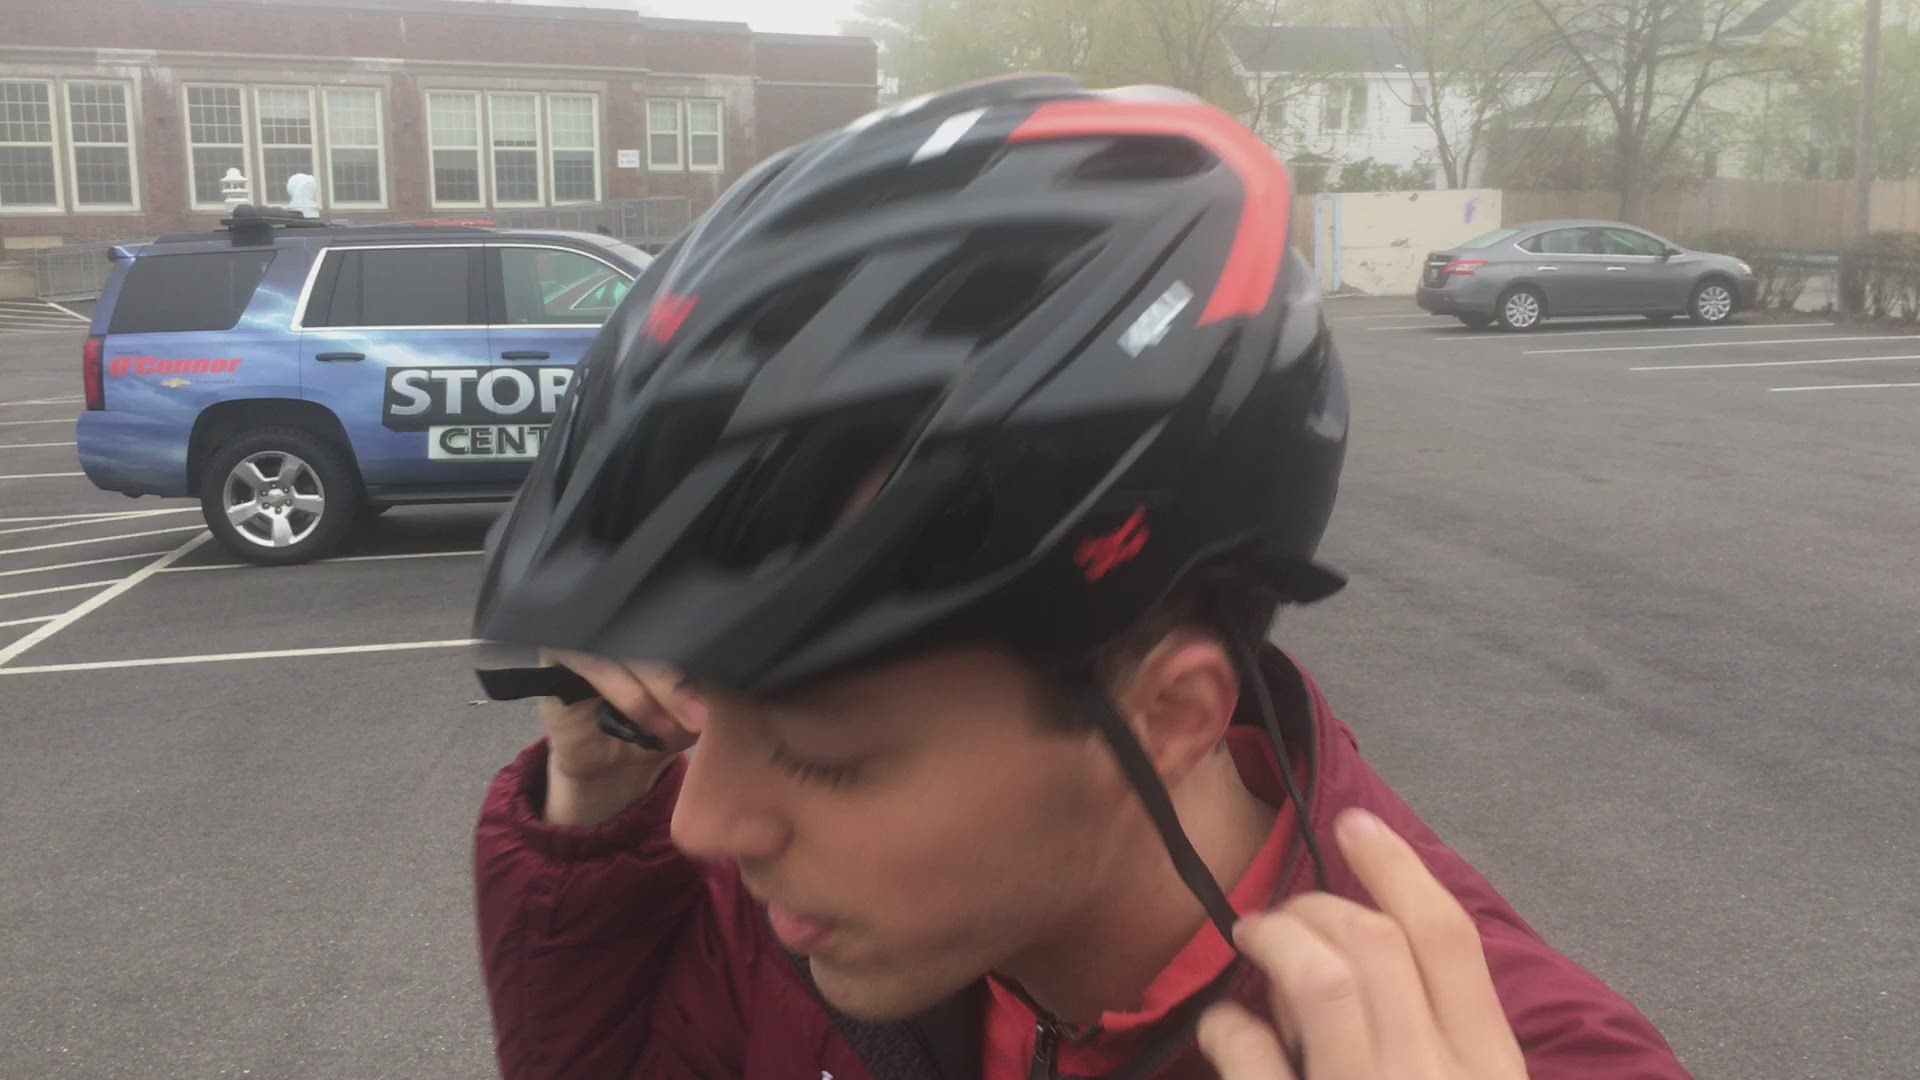 Cory Froomkin demonstrates the proper steps to get a good fit from your bike helmet